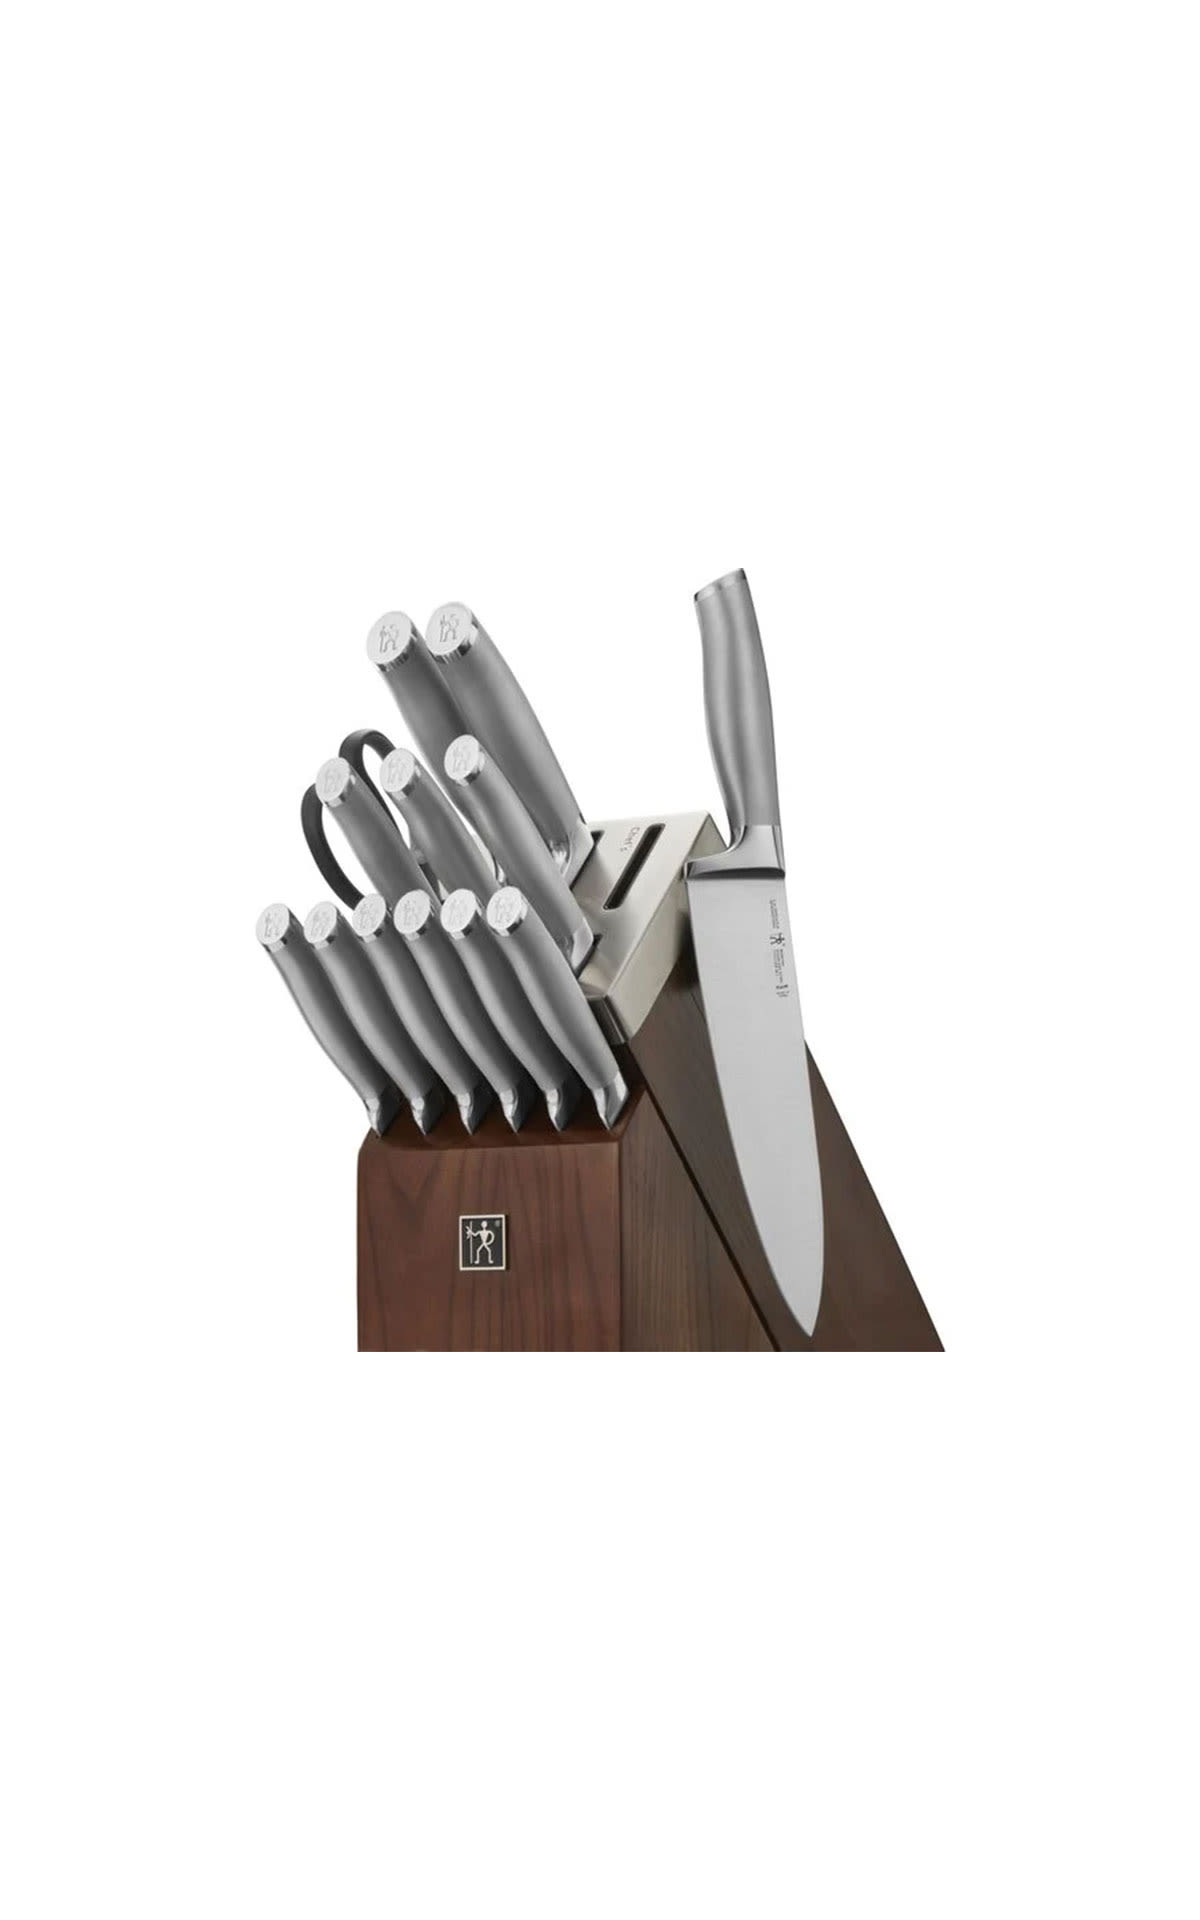 Zwilling Modernist knife block 14 pieces from Bicester Village